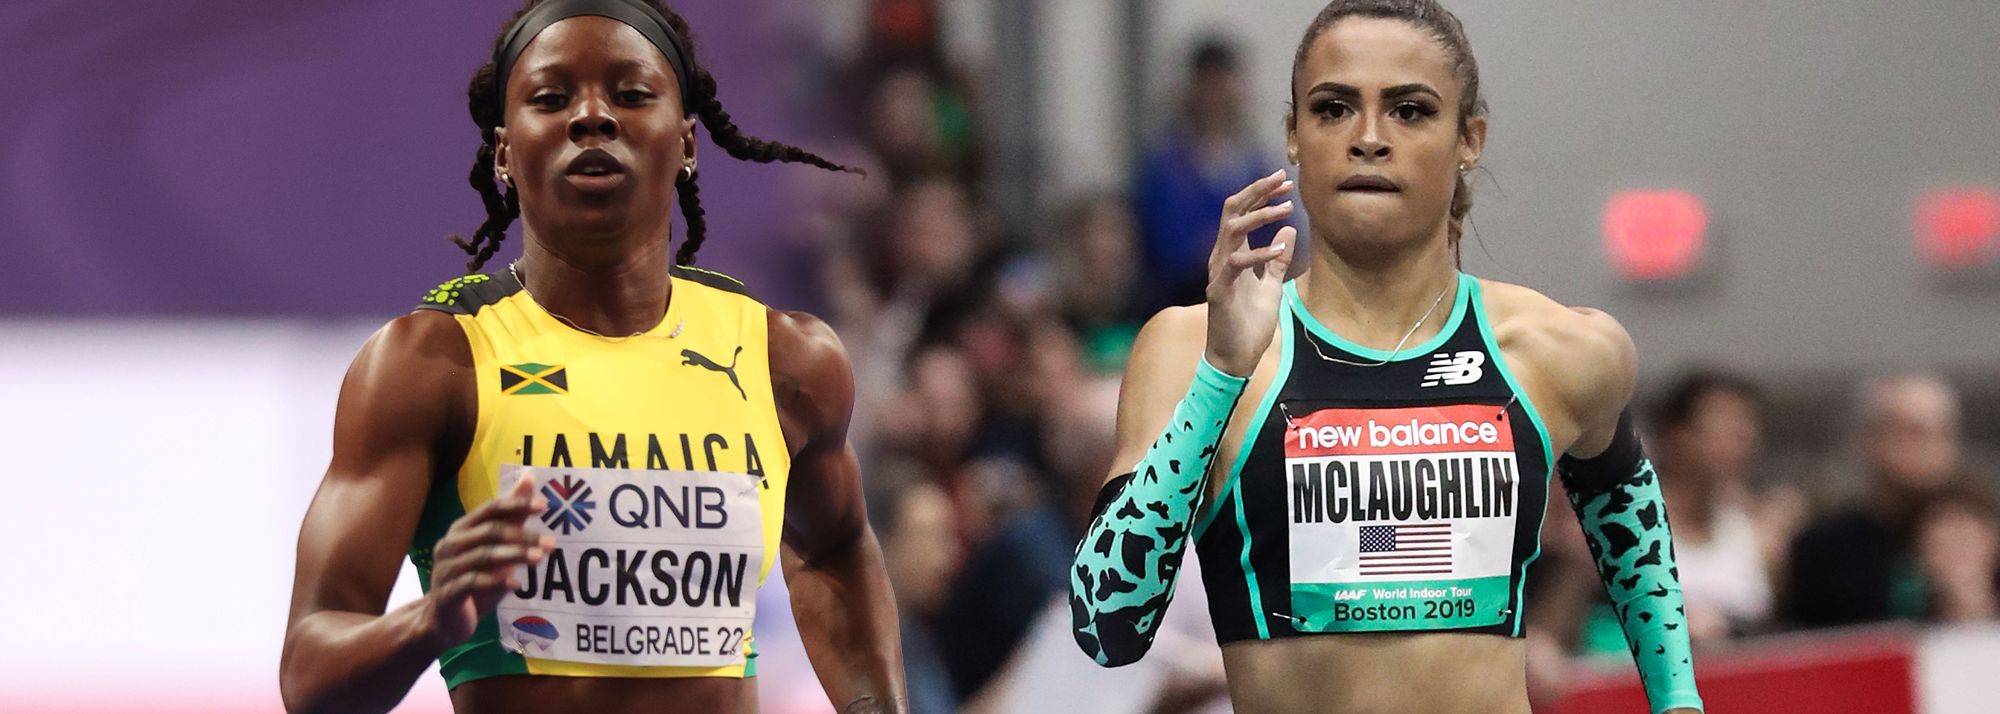 Sydney McLaughlin-Levrone and Shericka Jackson will drop down in distance to race Mikiah Brisco and Aleia Hobbs at the New Balance Indoor Grand Prix